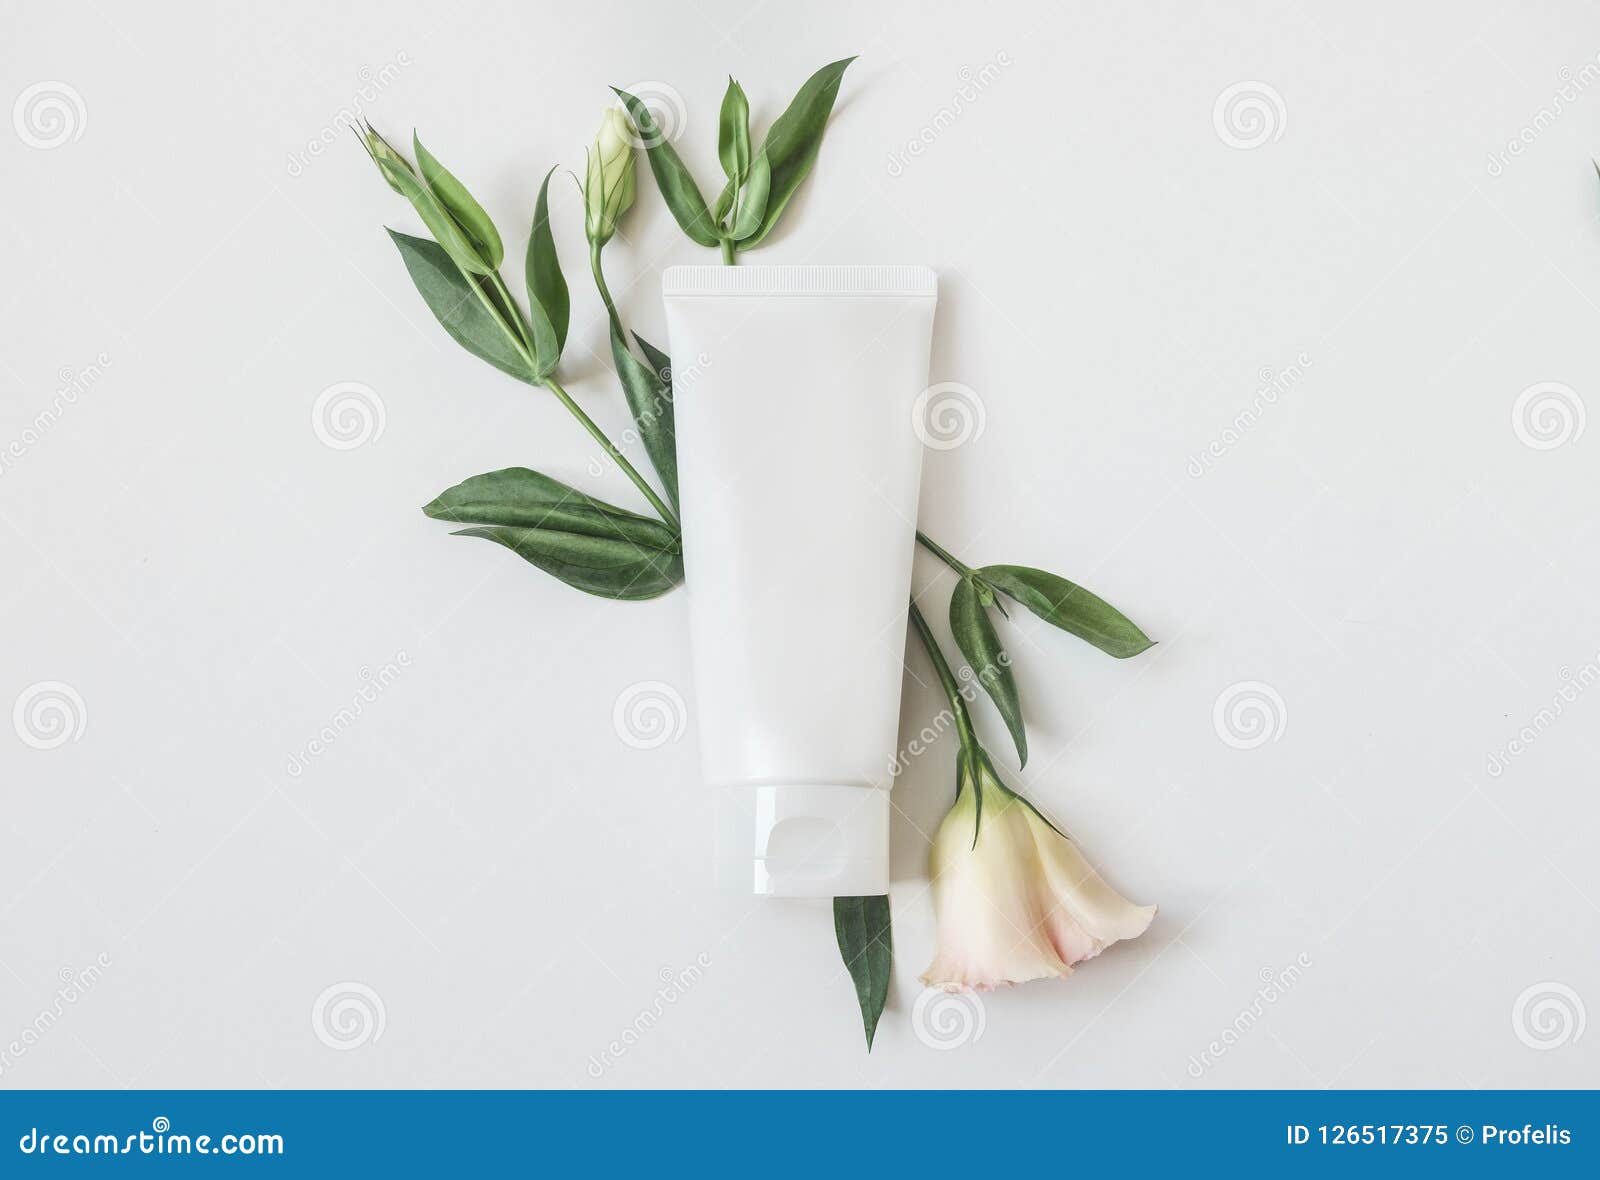 Download Natural Organic Cosmetic Packaging Plastic Mock Up With Leaves And Flowers Mock Up Bottle For Branding And Label Stock Image Image Of Nature Green 126517375